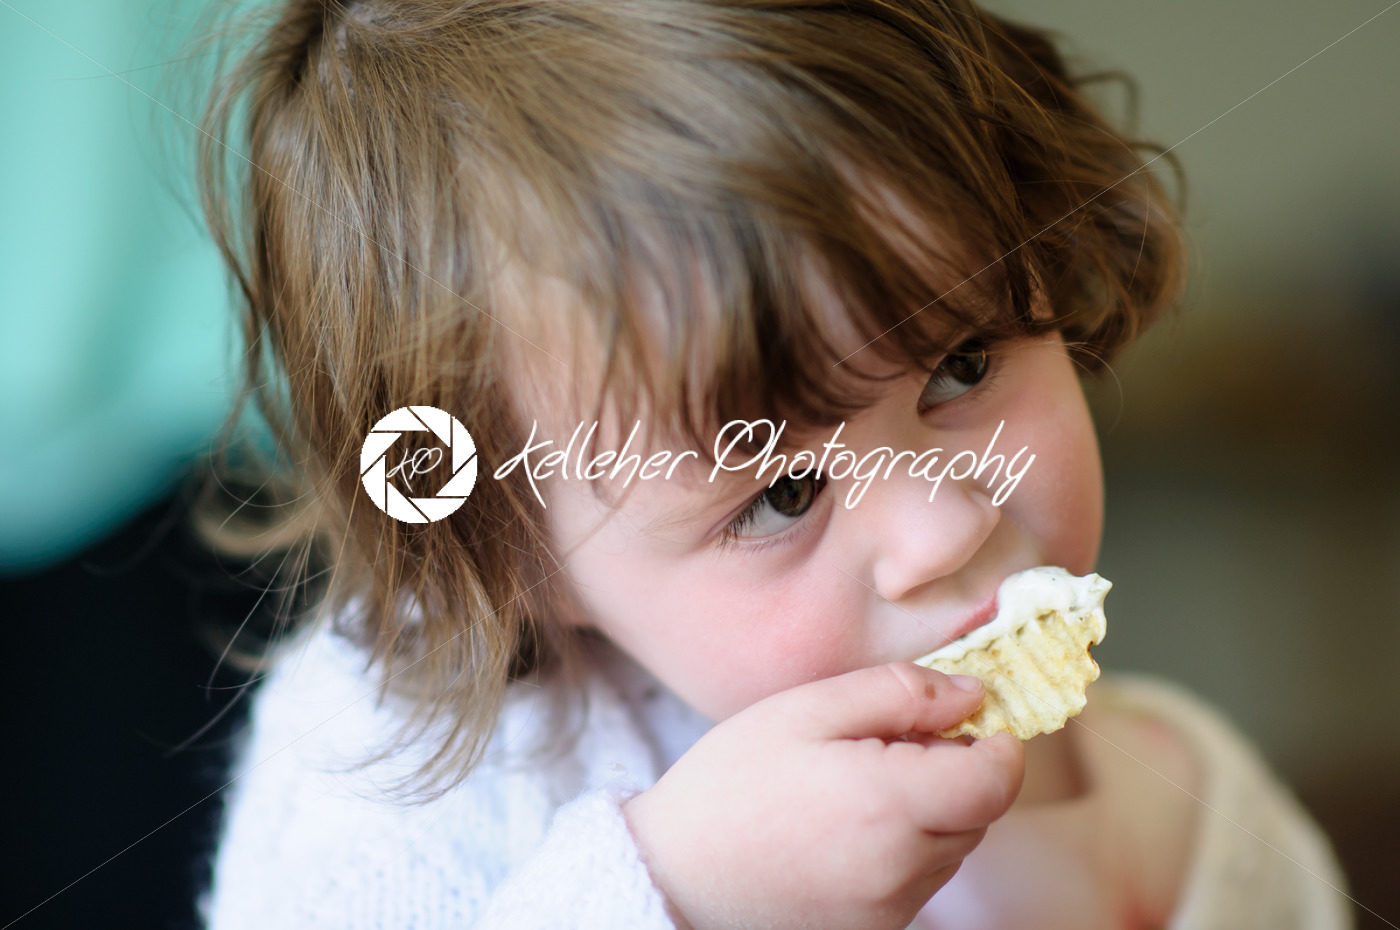 Portrait of a cute little girl inside eating potato chip with sour cream dip on it - Kelleher Photography Store